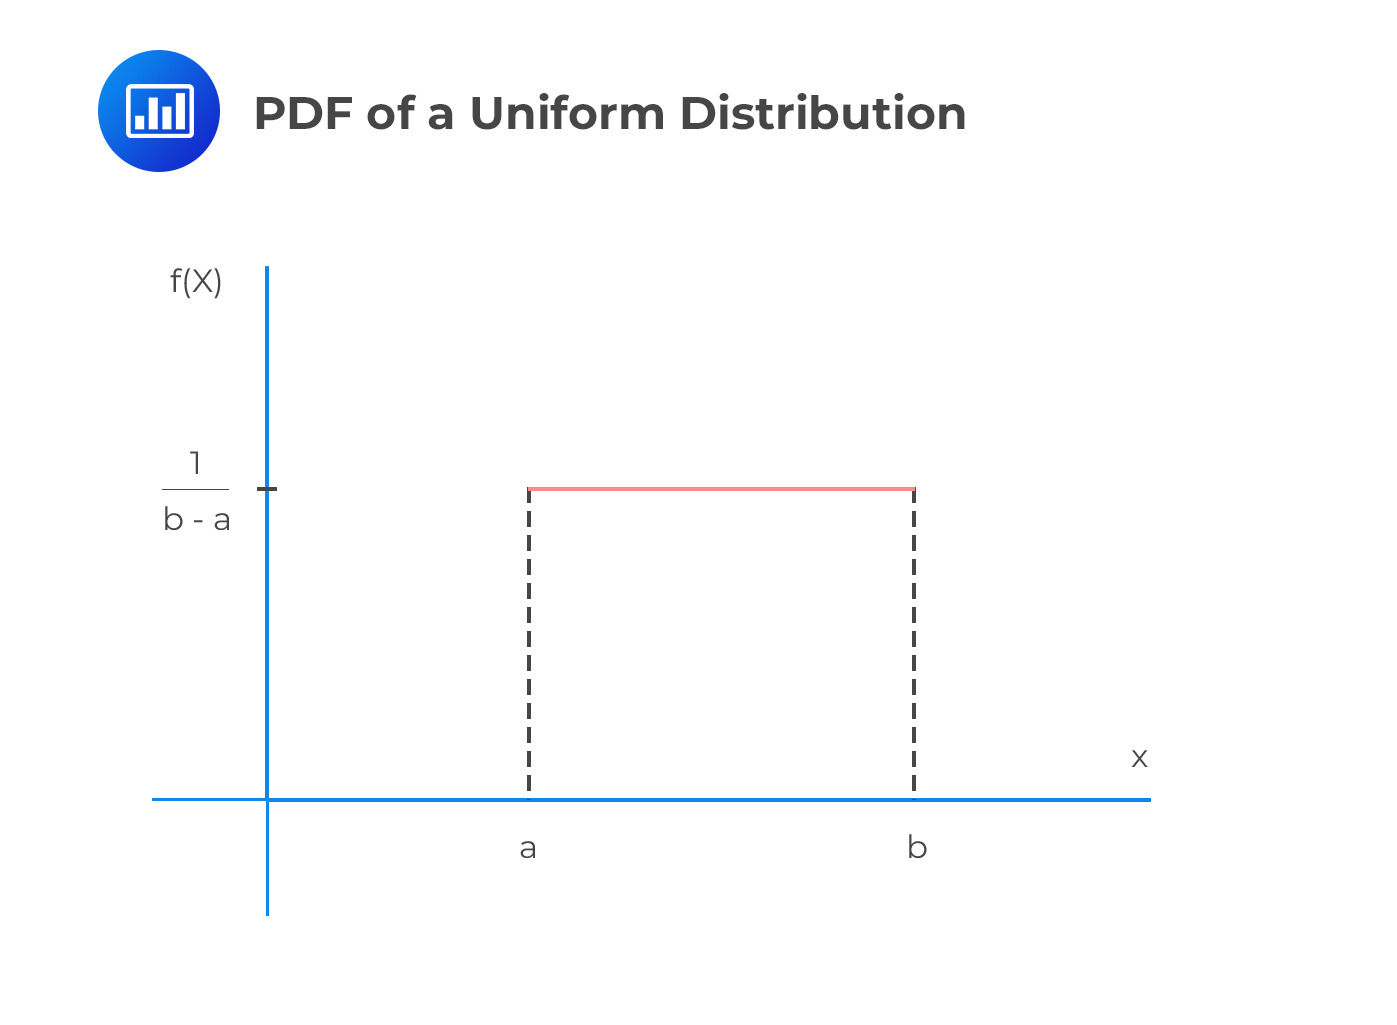 Solved The Probability distribution for the rating x of